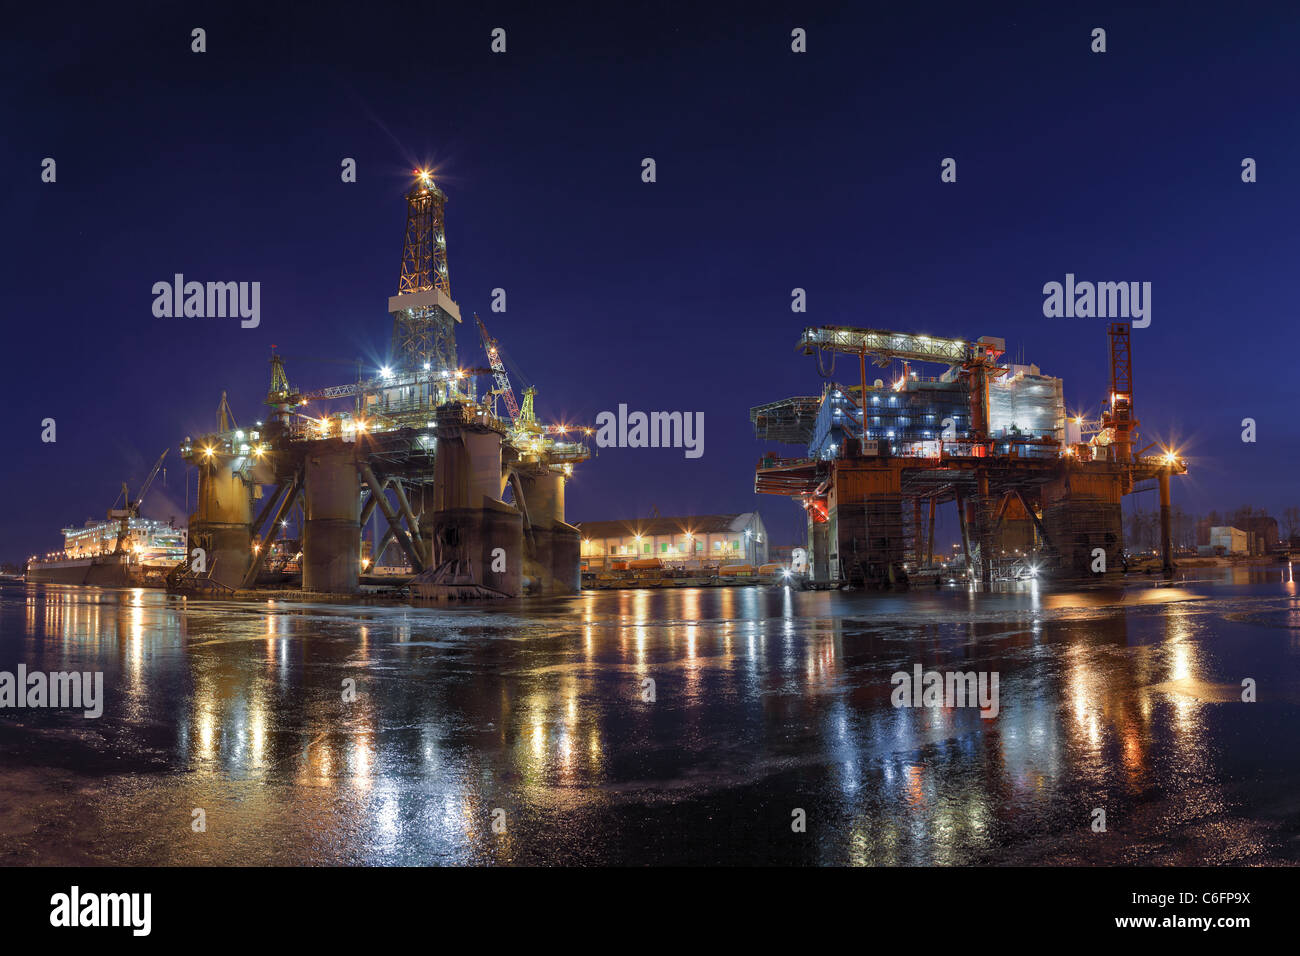 Repair of the oil rig in the shipyard. Stock Photo